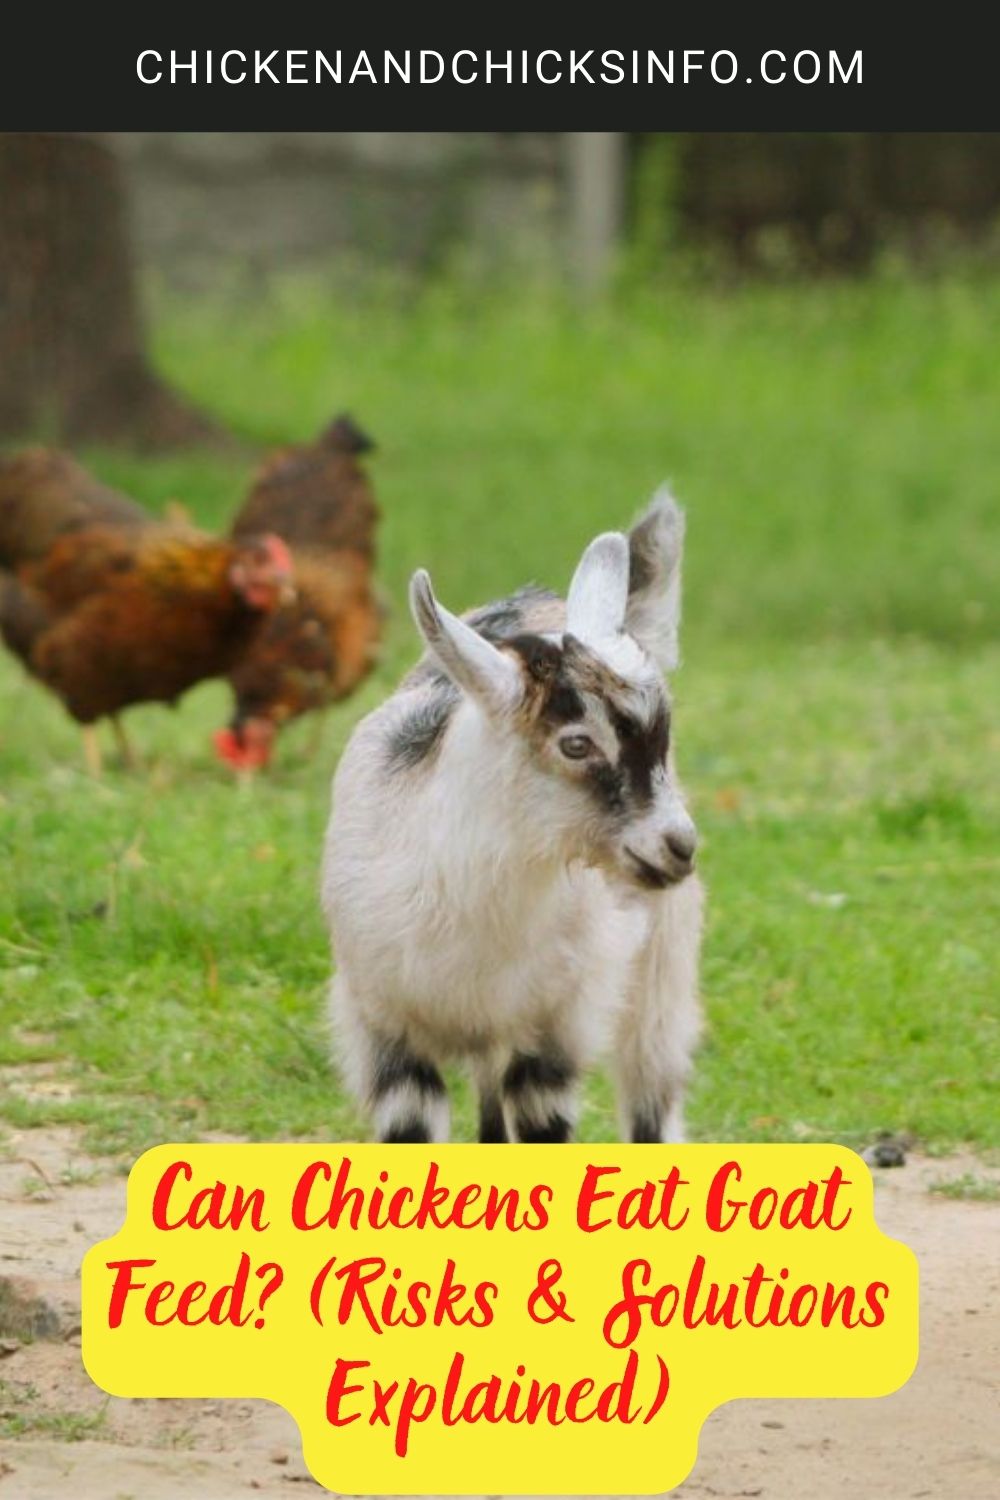 Can Chickens Eat Goat Feed poster.